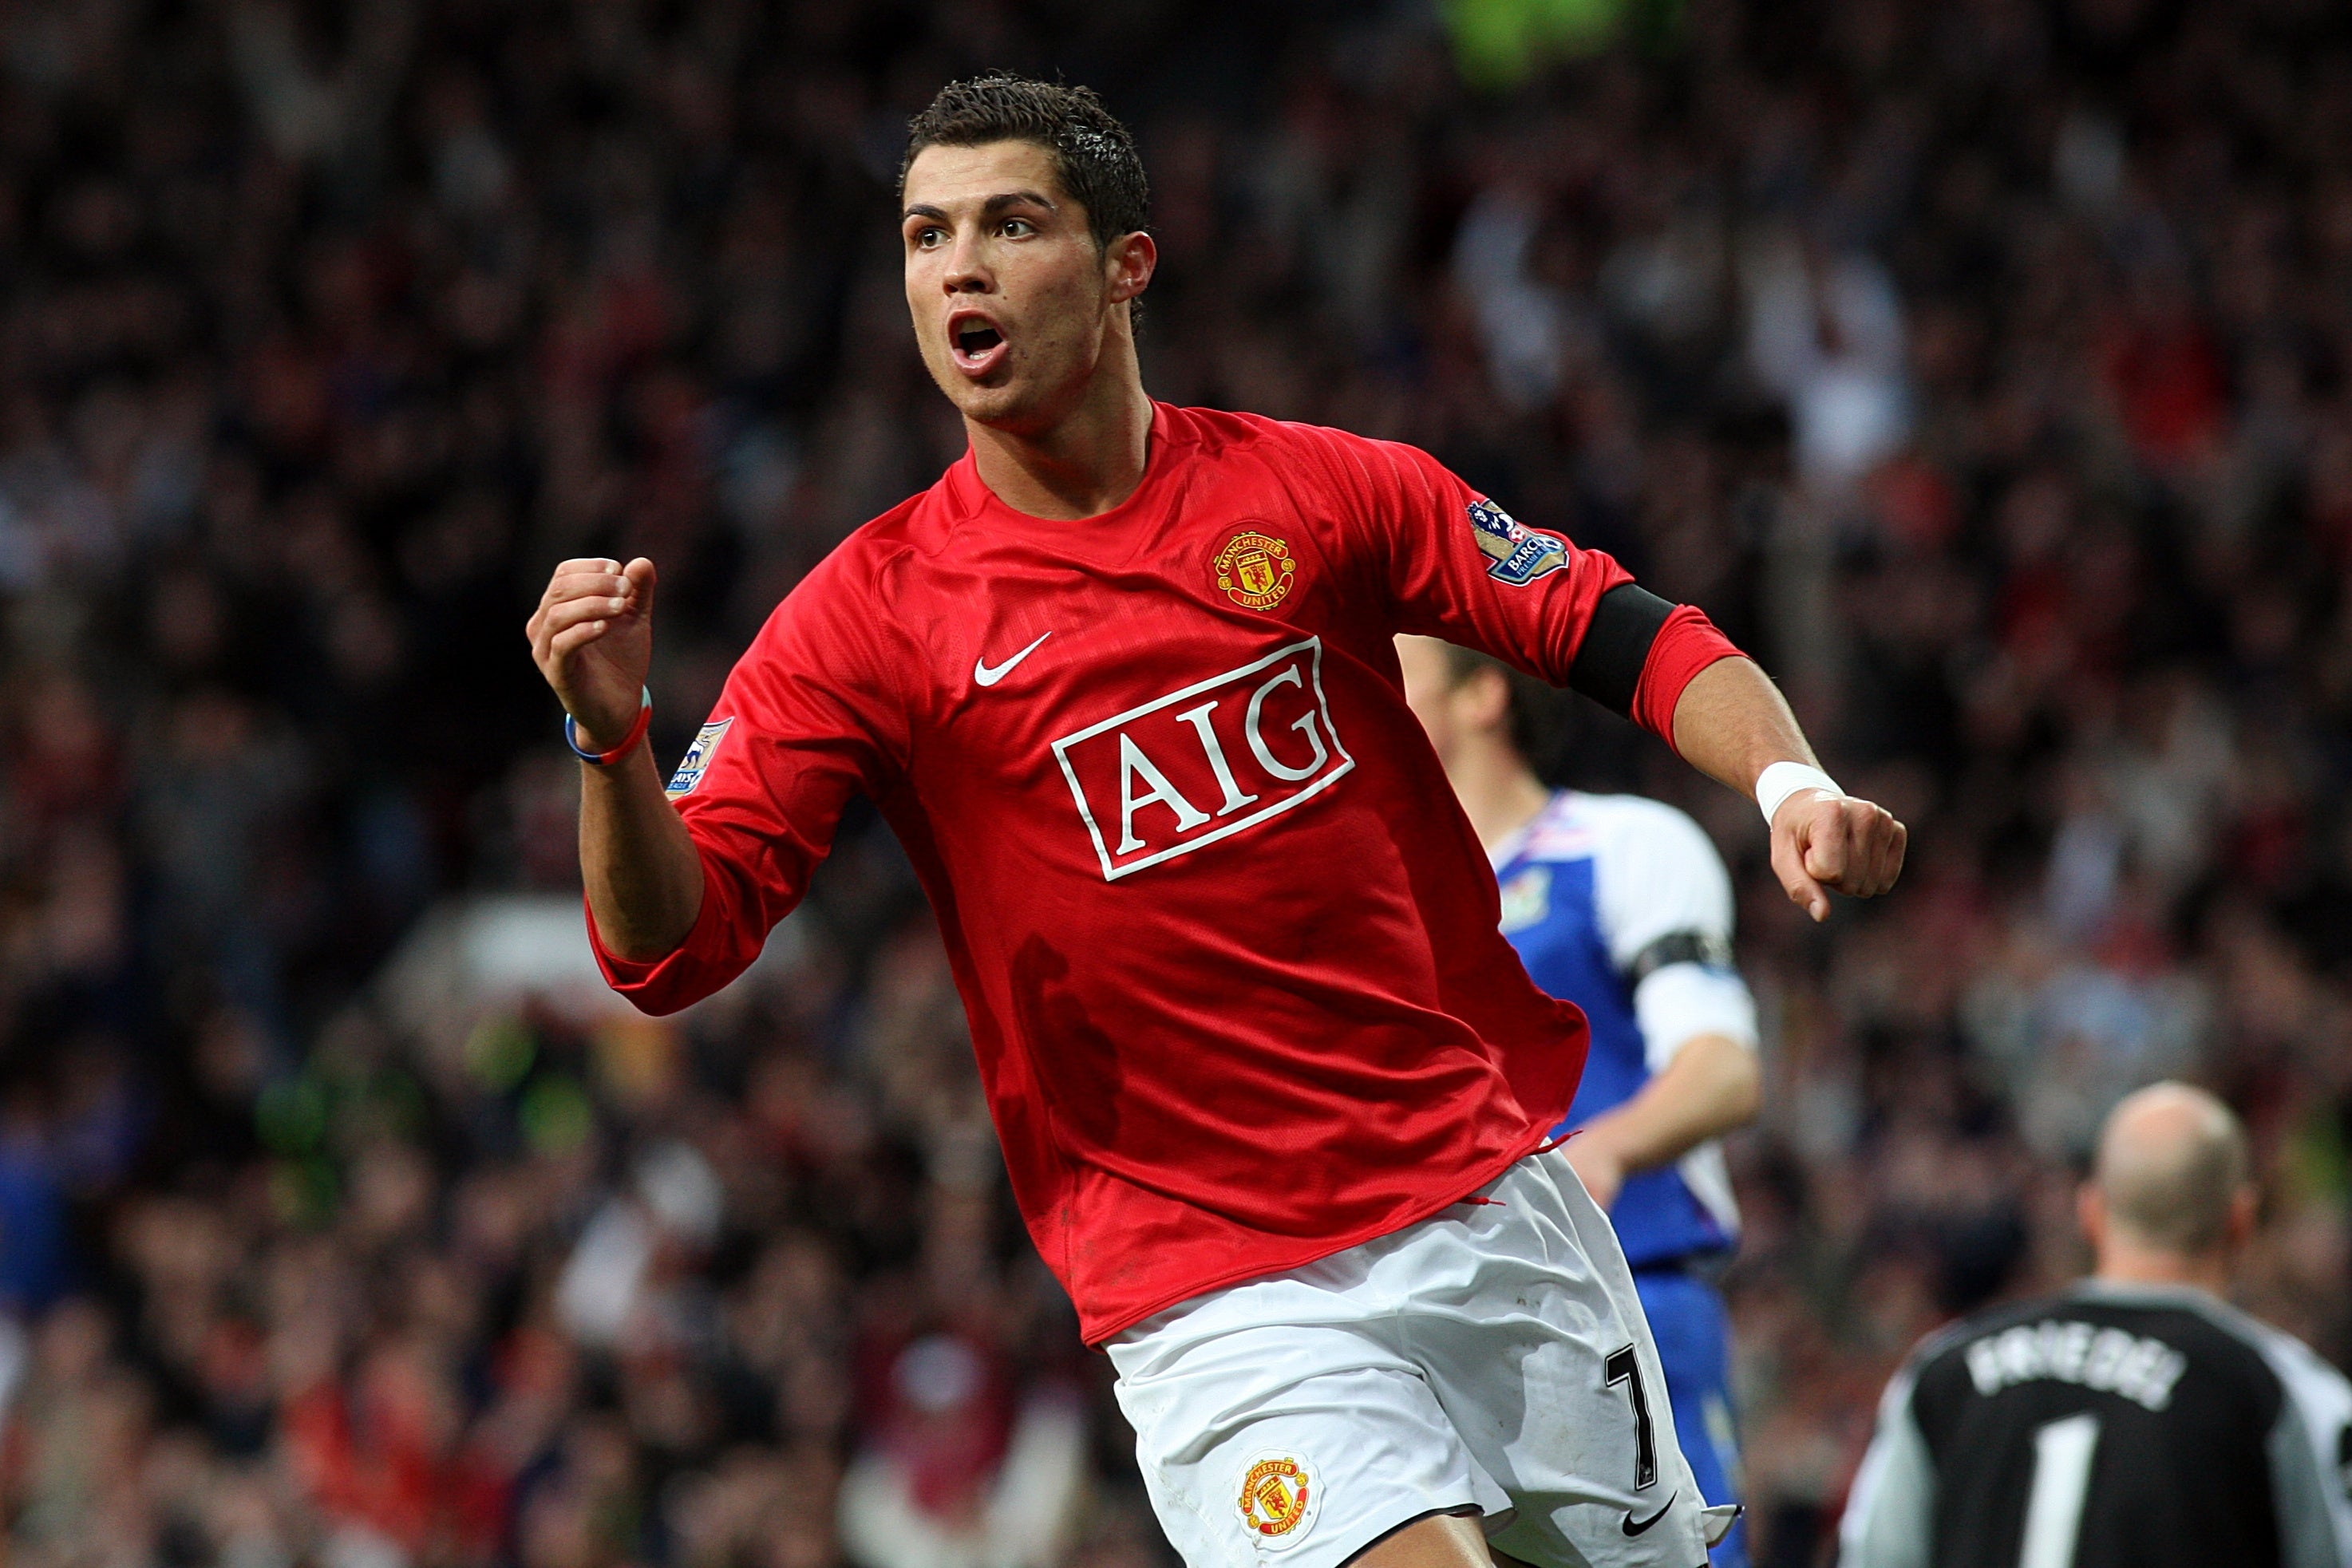 Cristiano Ronaldo enjoyed a prolific spell at Old Trafford before leaving for Spain (Martin Rickett/PA)